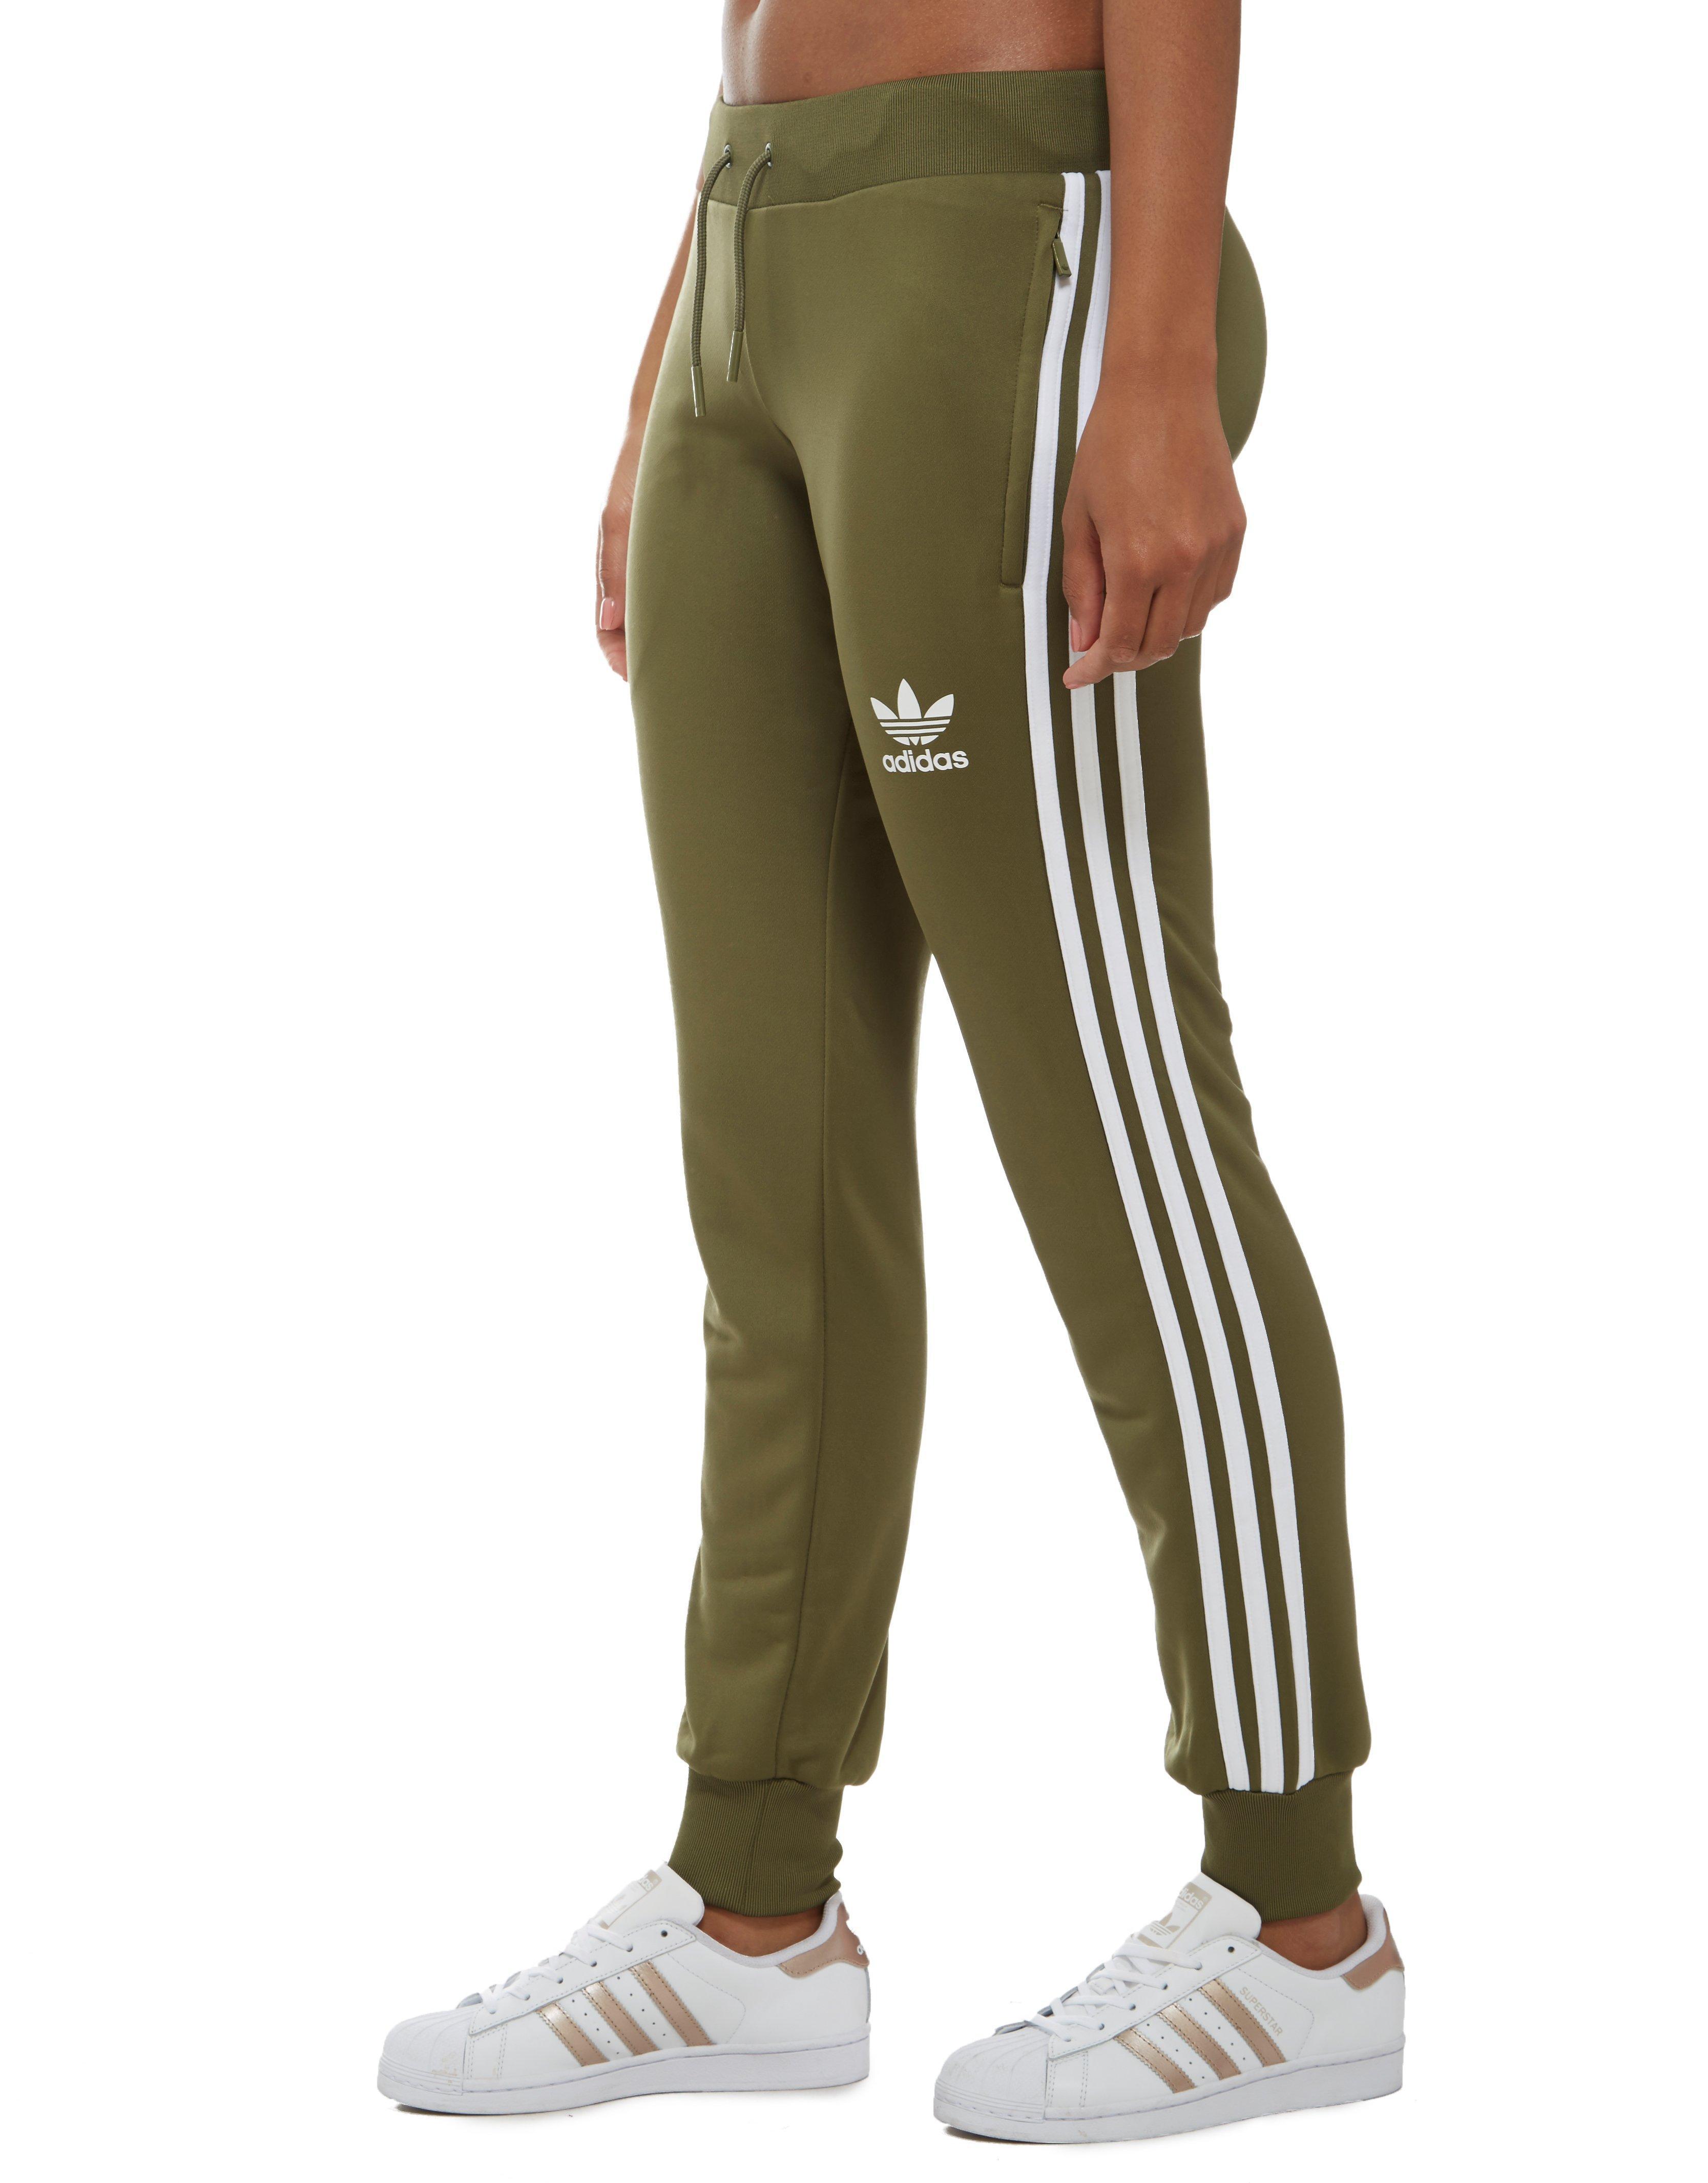 green and white adidas track pants